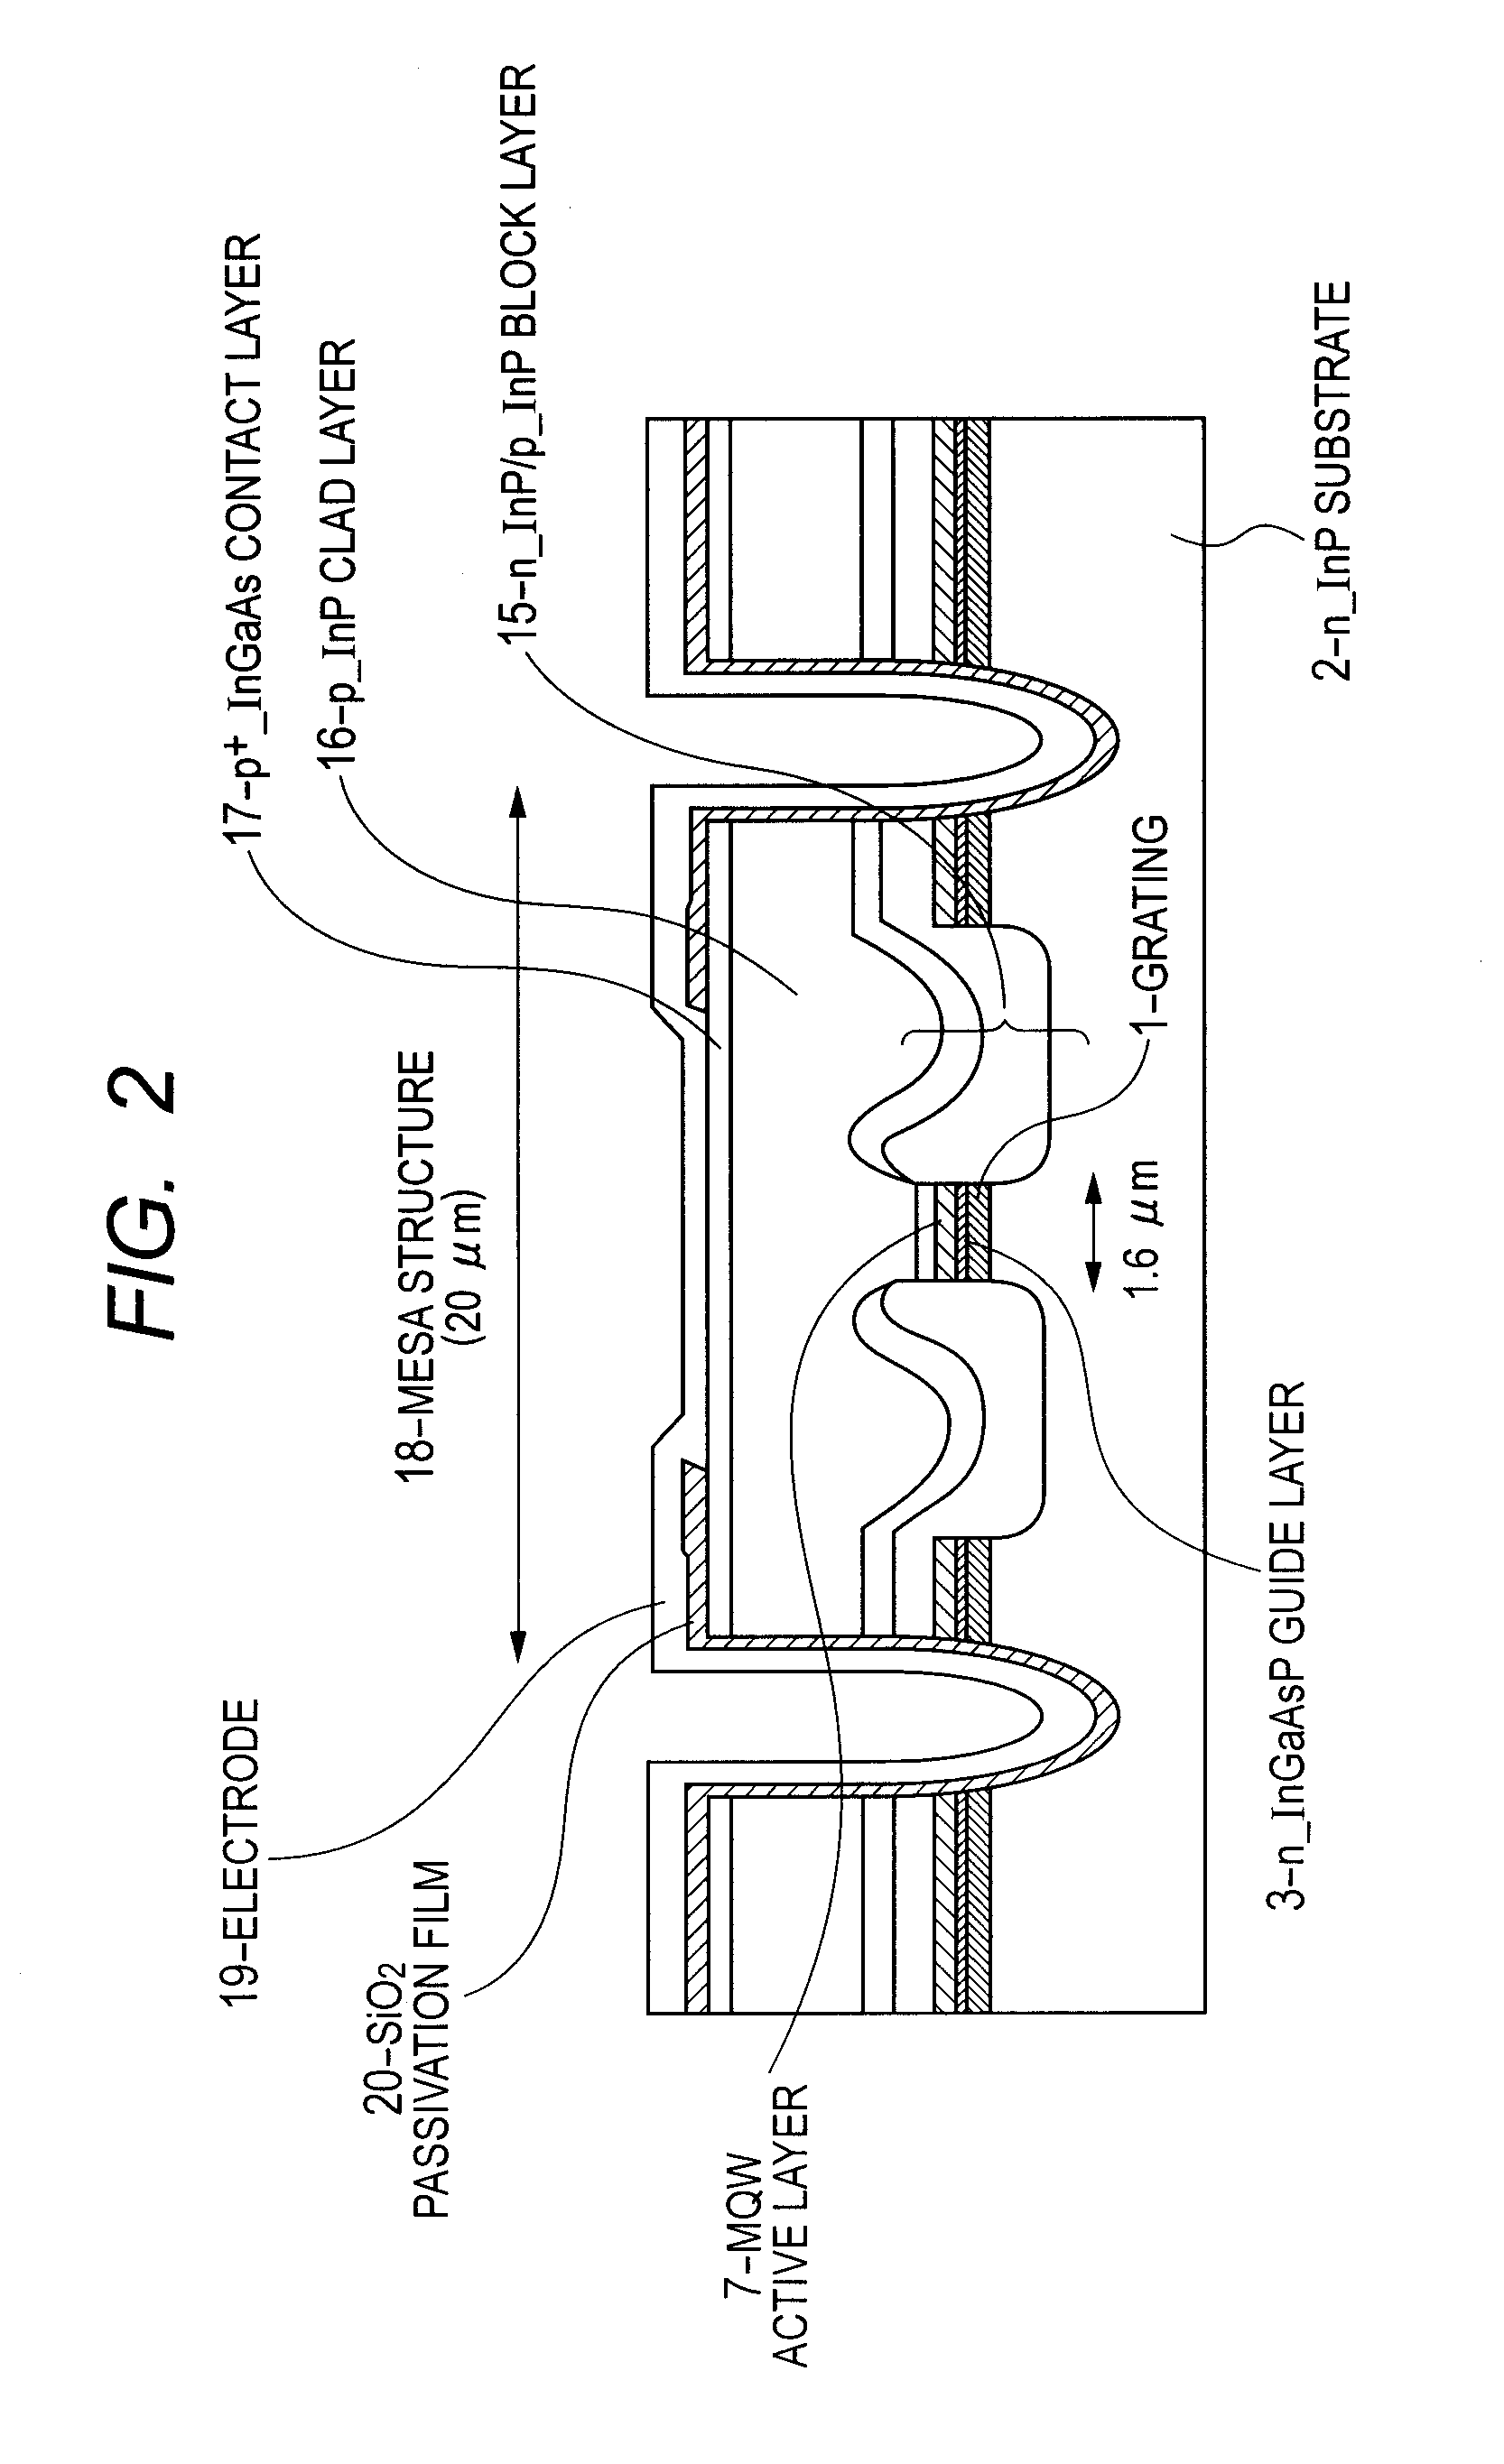 Semiconductor laser diode device and method of fabrication thereof